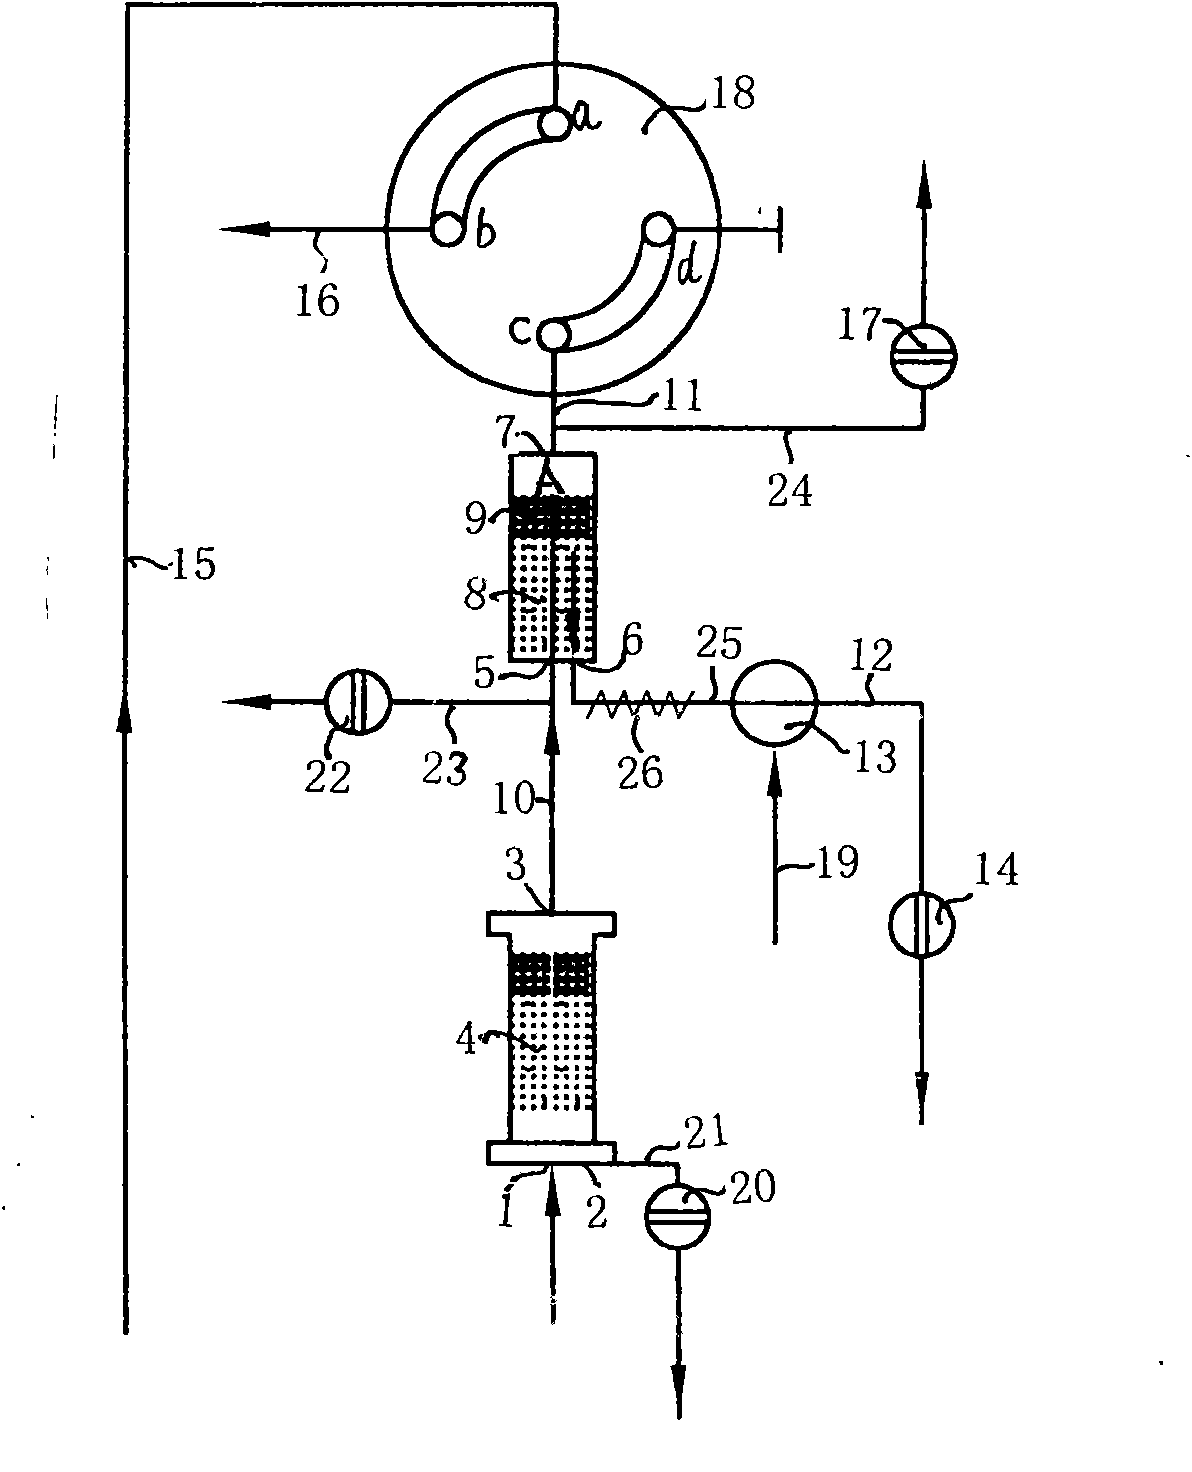 Automatic thermal desorption instrument based on thermal gas desorption